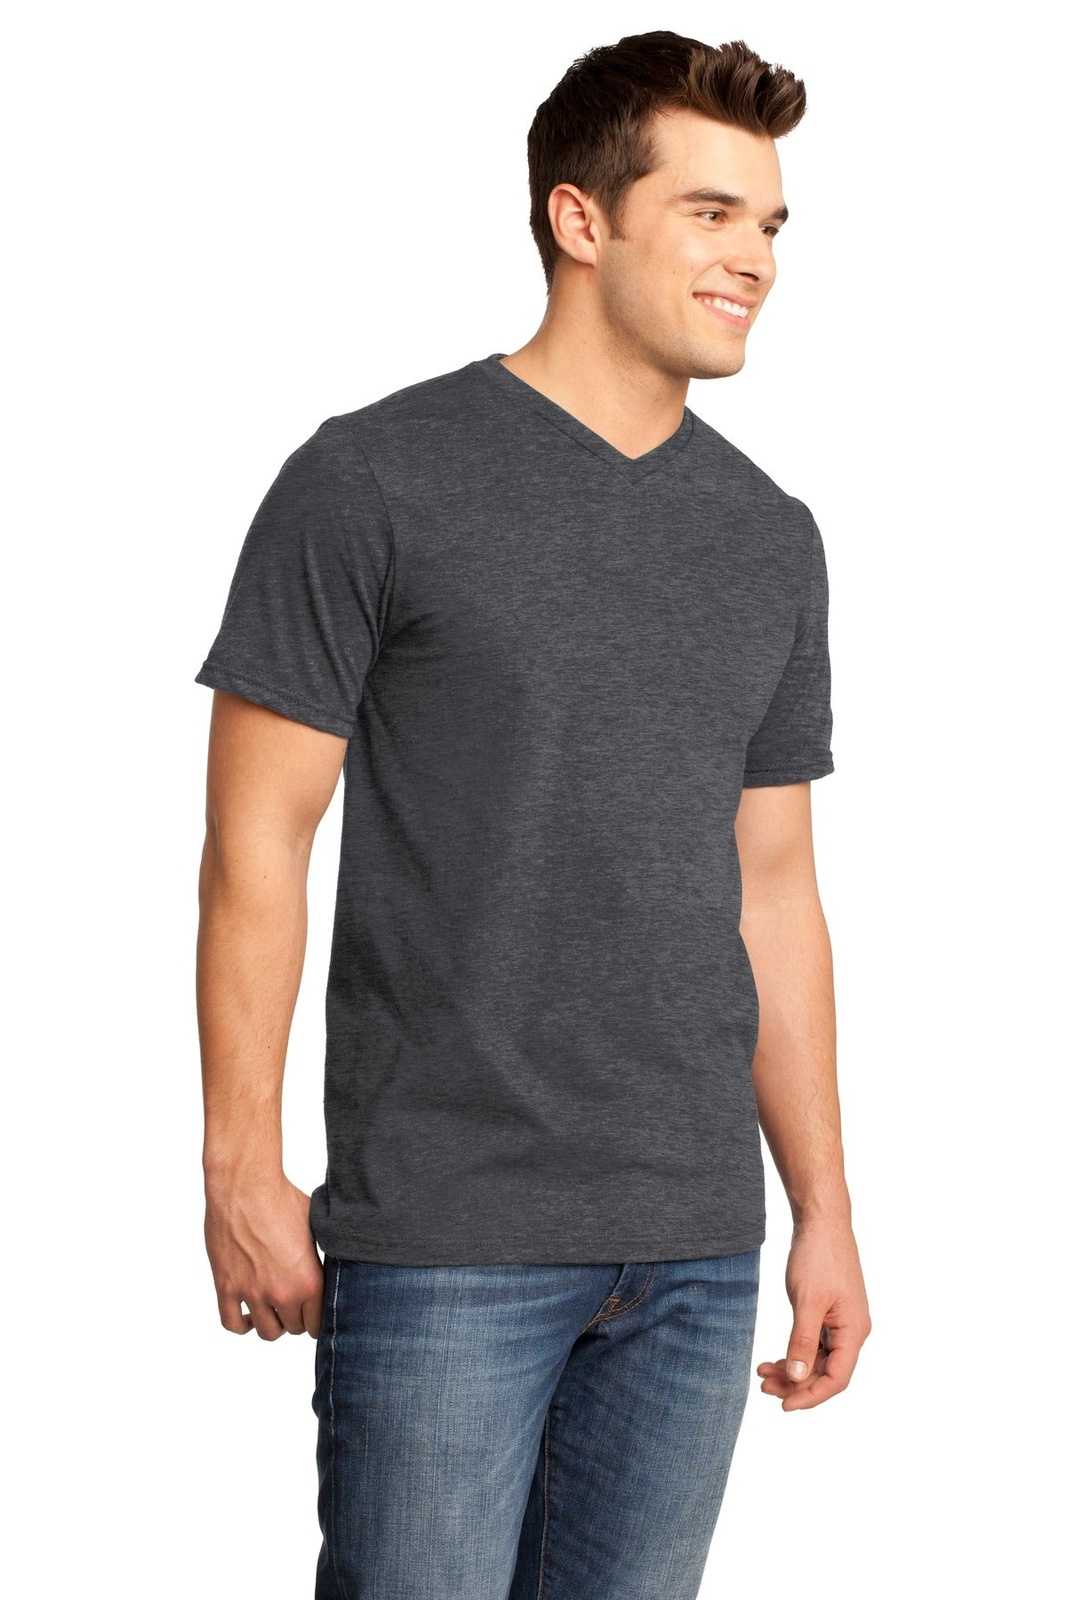 District DT6500 Very Important Tee V-Neck - Heathered Charcoal - HIT a Double - 4